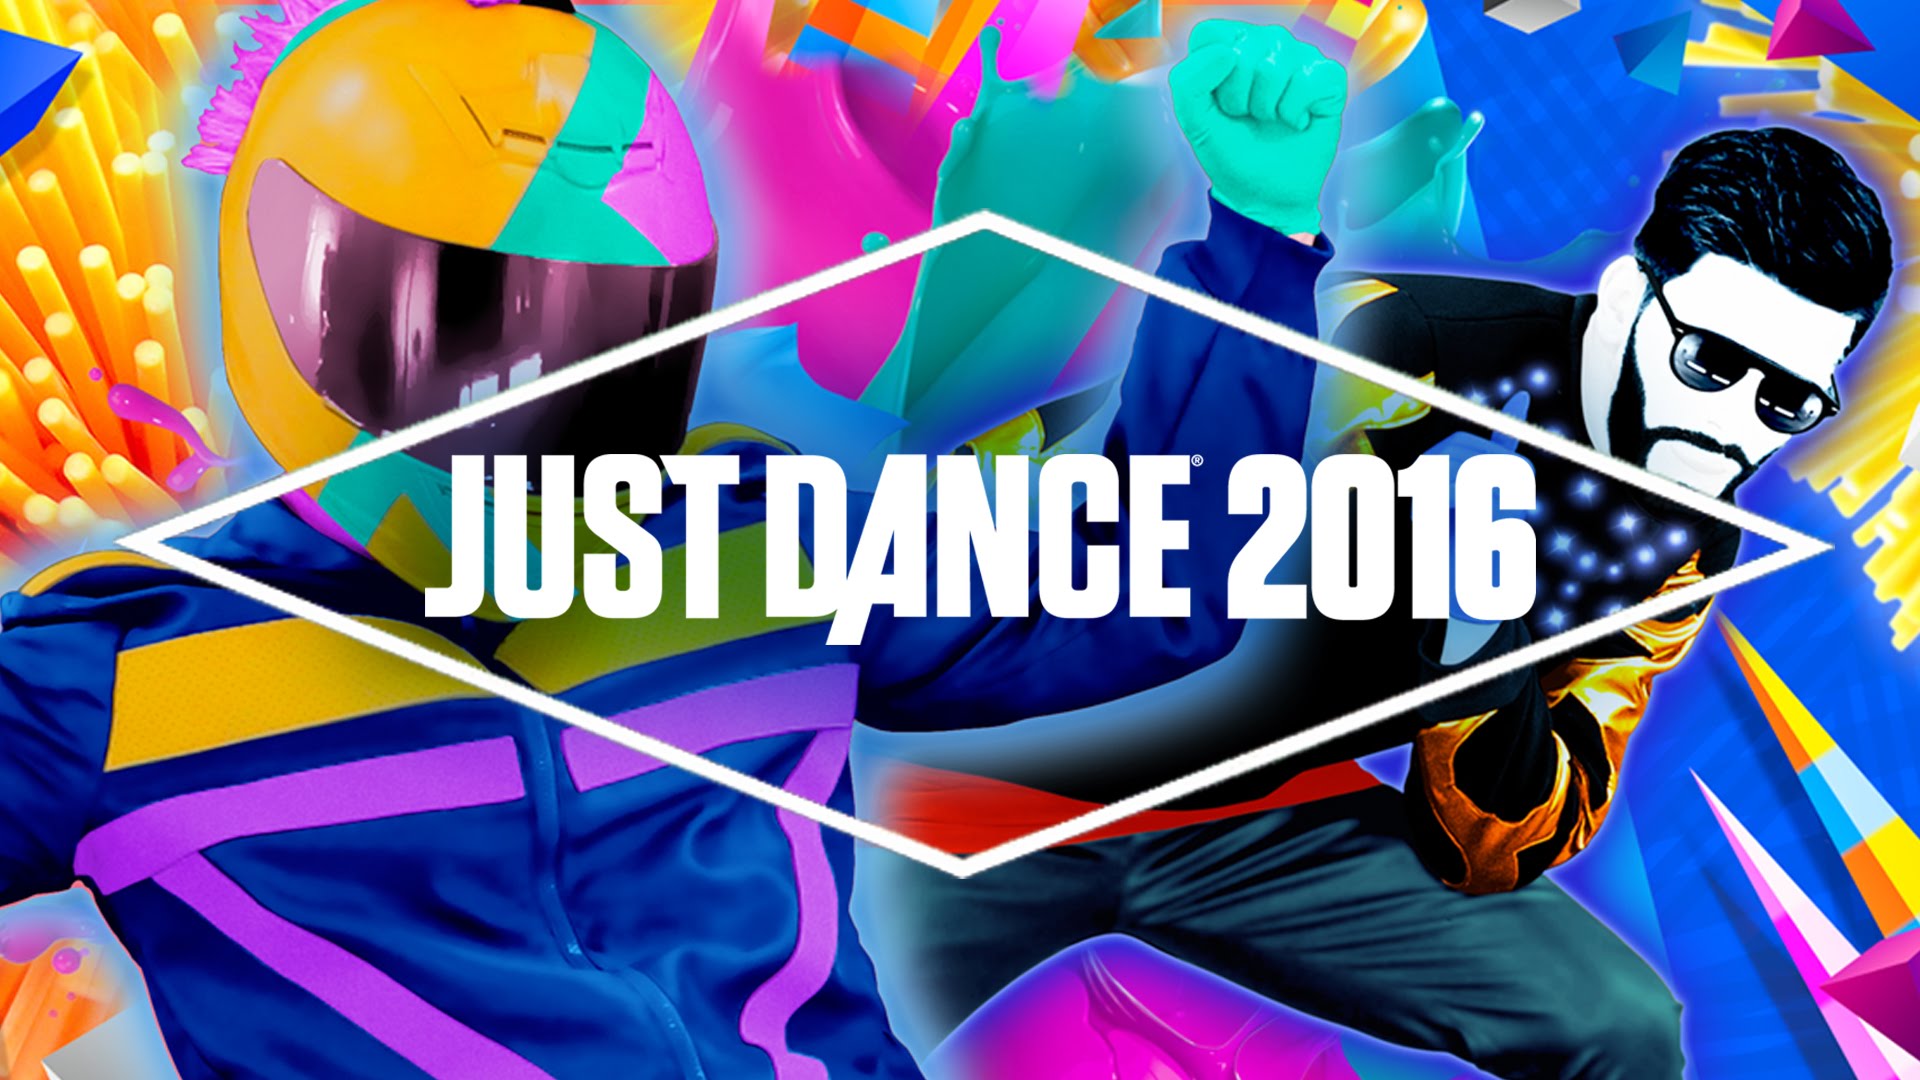 Is it just a game. Just Dance 2016. Just Dance 2016 (Xbox one) обложка. Джаст дэнс НАУ. Just Dance 2016 (Xbox one) Скриншот.